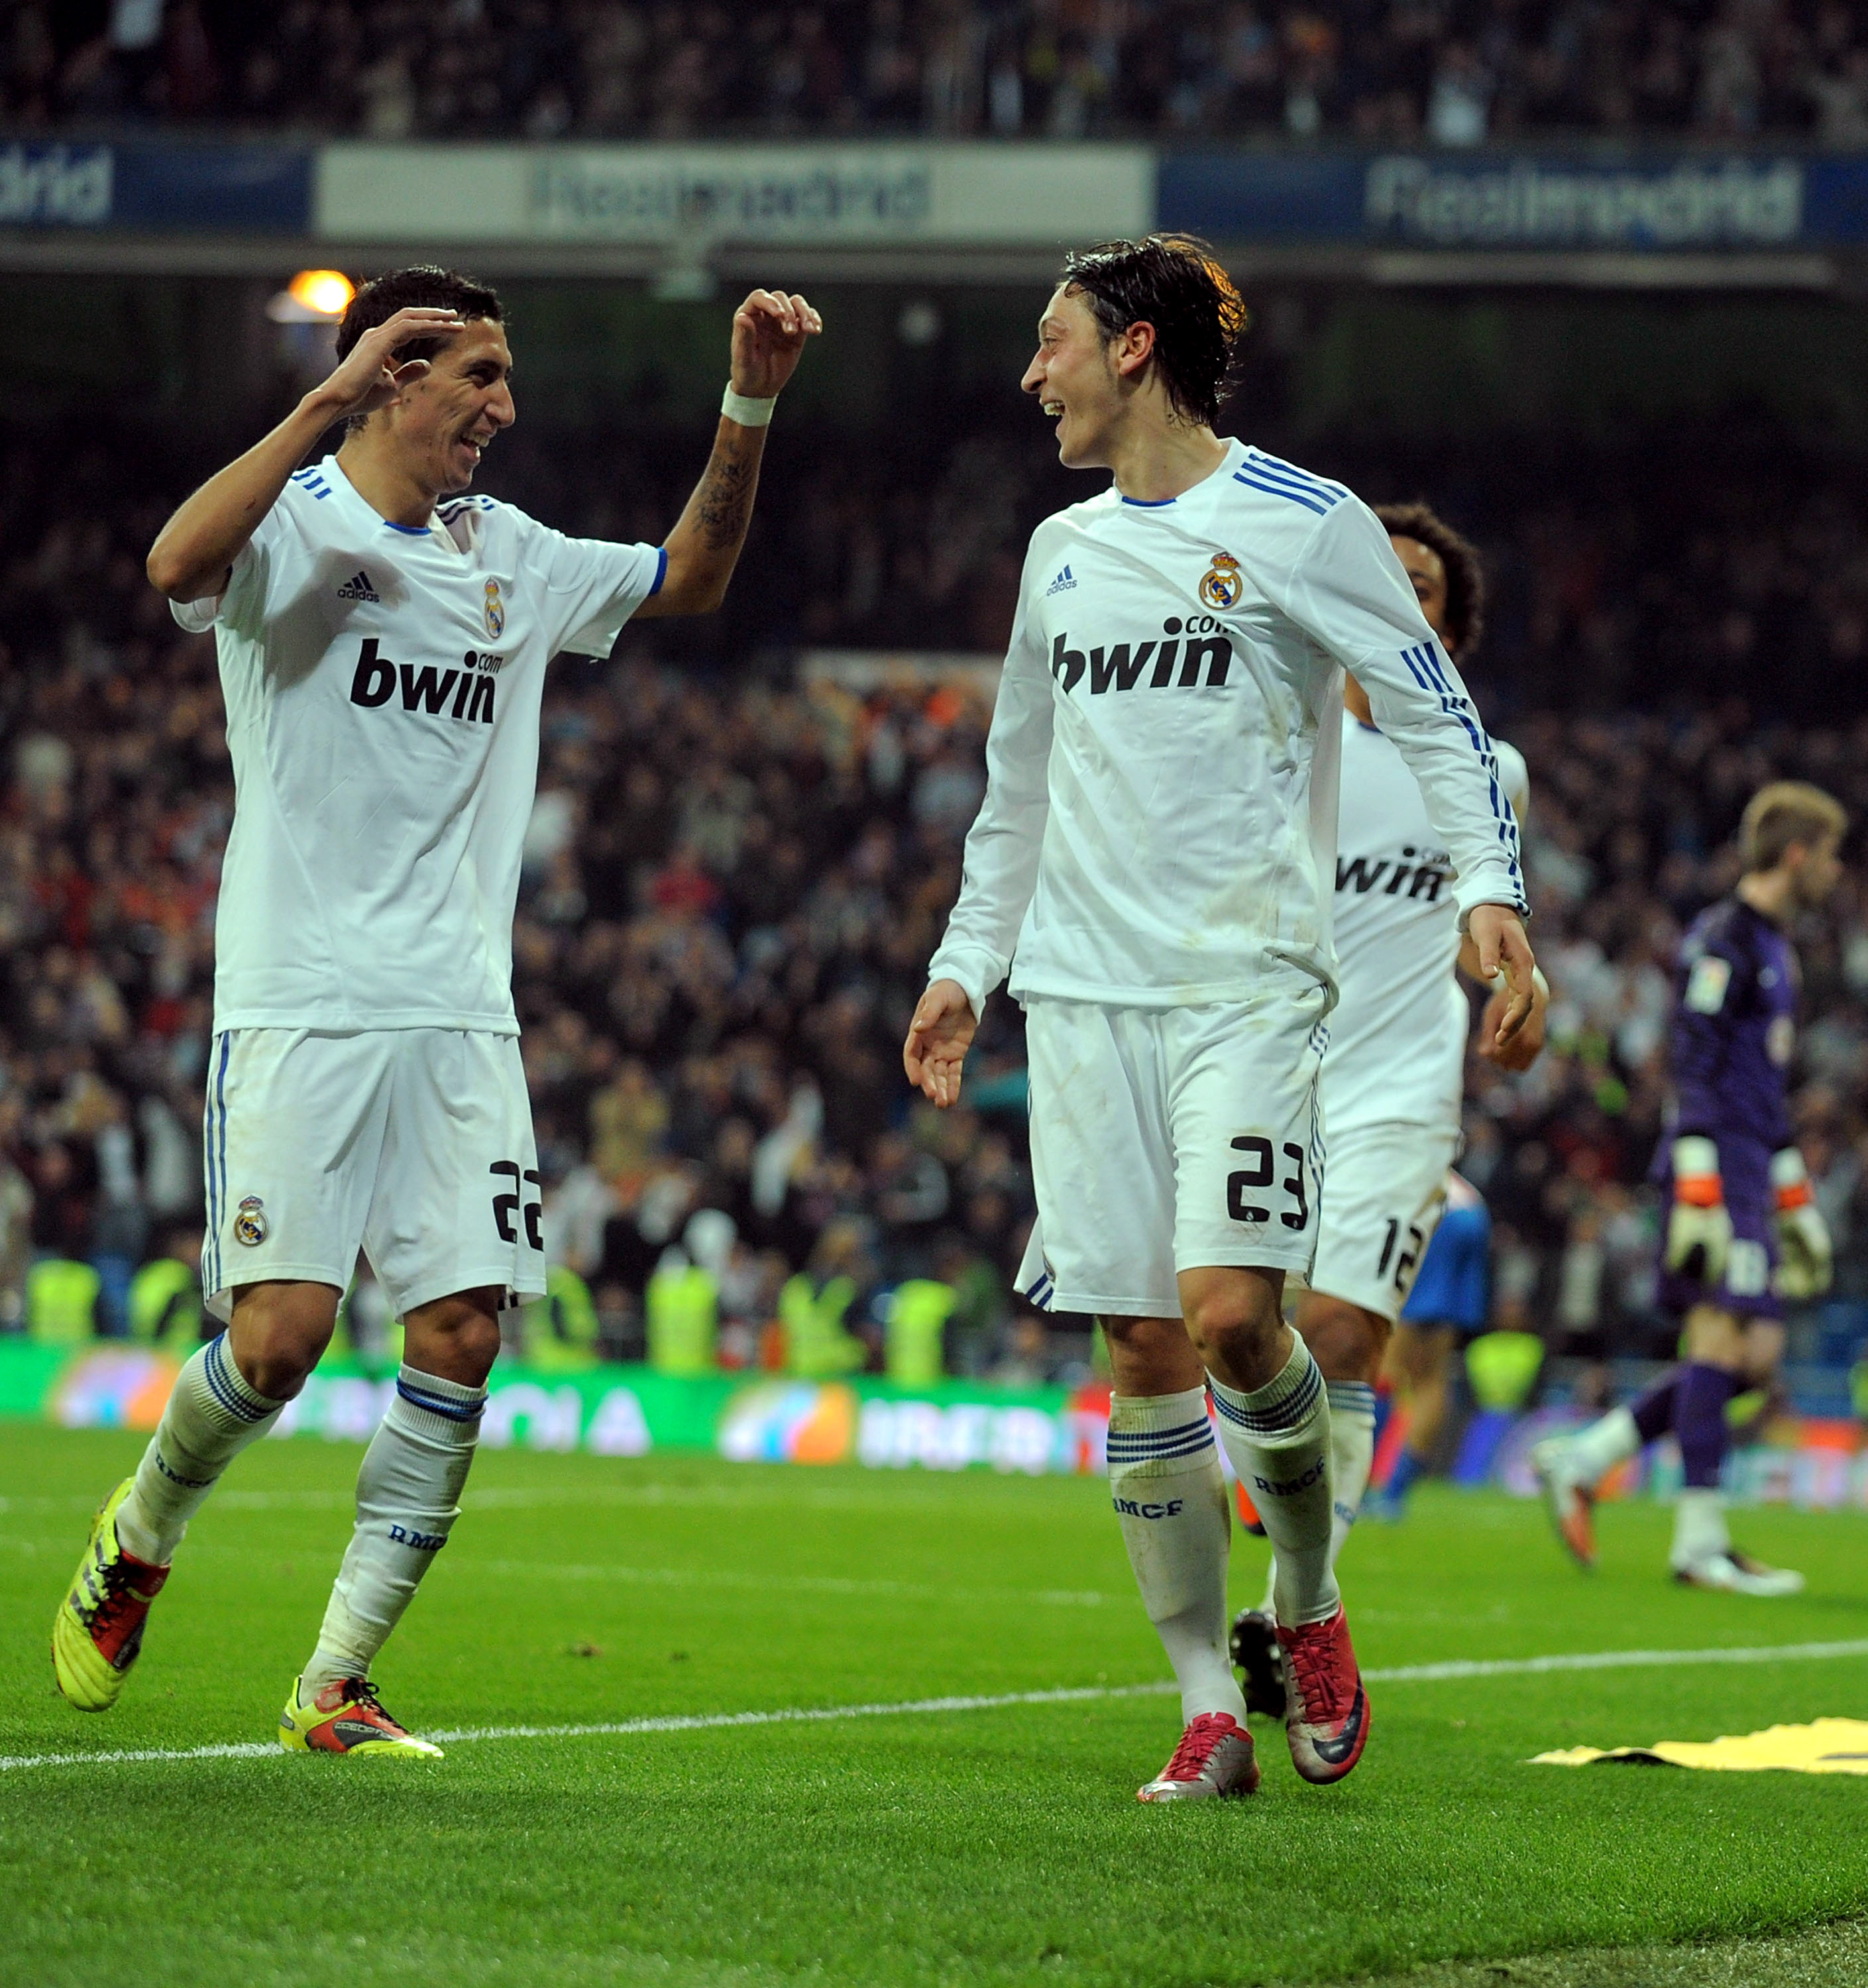 MADRID, SPAIN - JANUARY 13:  Mesut Ozil (R)of Real Madrid celebrates with Angel di Maria after scoring Real's third goal during the Copa del Rey quarter final first leg match between Real Madrid and Atletico Madrid at Estadio Santiago Bernabeu on January